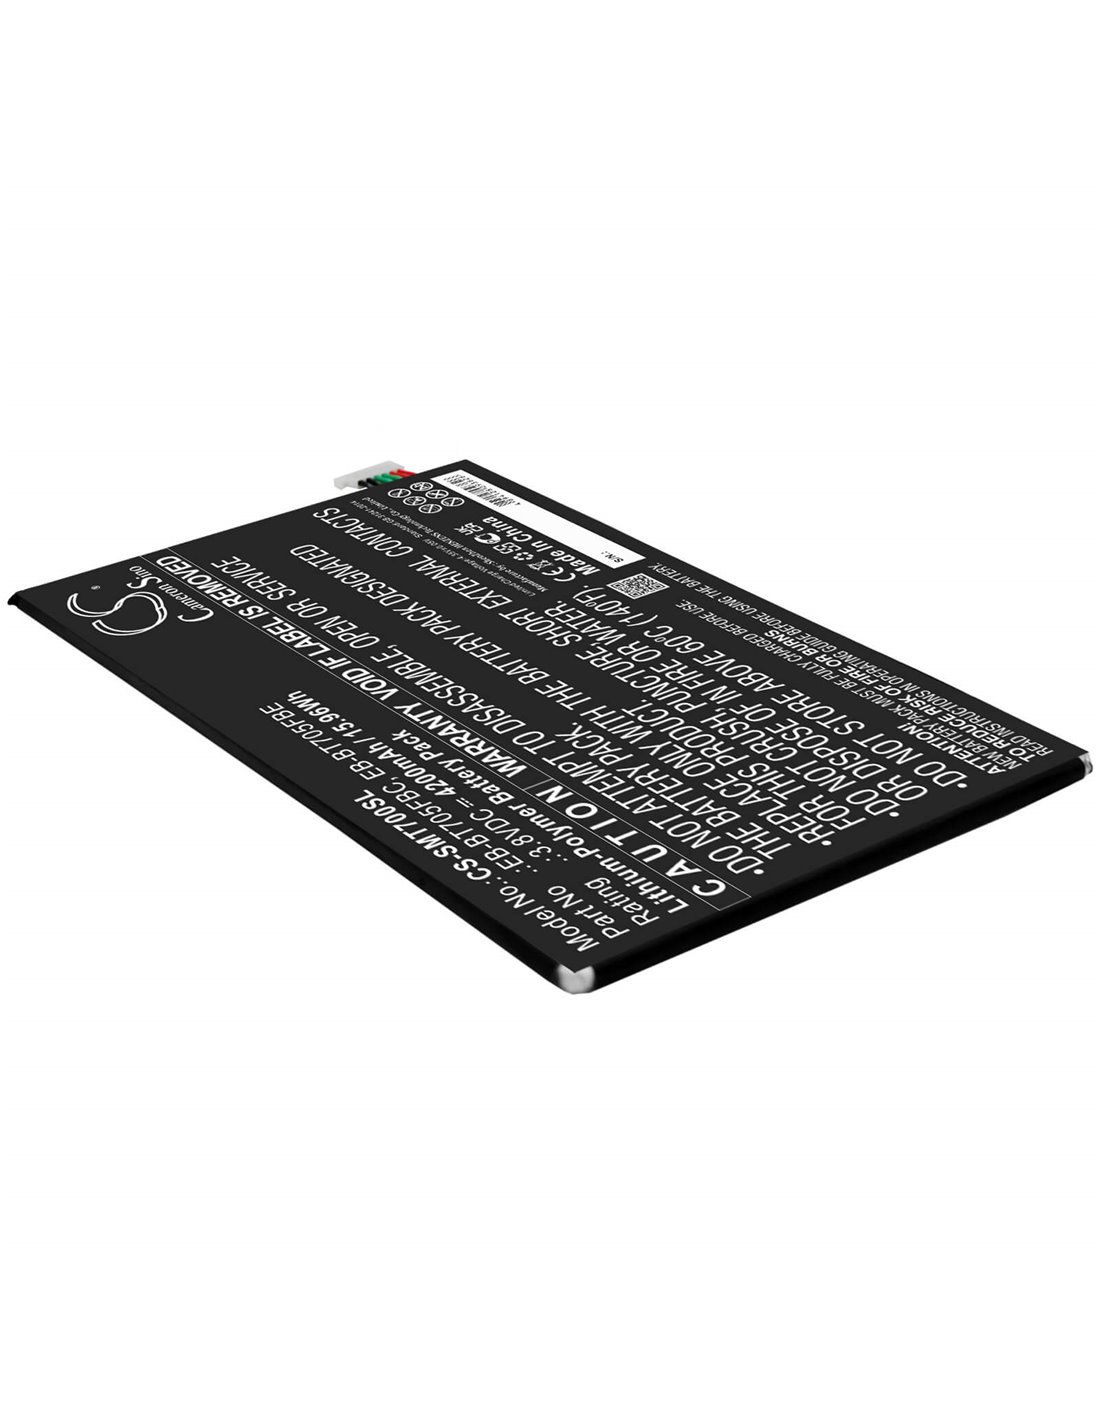 EB-BT705FBU Klimt EB-BT705FBE SM-T700 SC-03G Replacement for Microsoft EB-BT705FBC Rechargeable Battery for Samsung Galaxy Tab S 8.4 SM-T705 SM-T707 